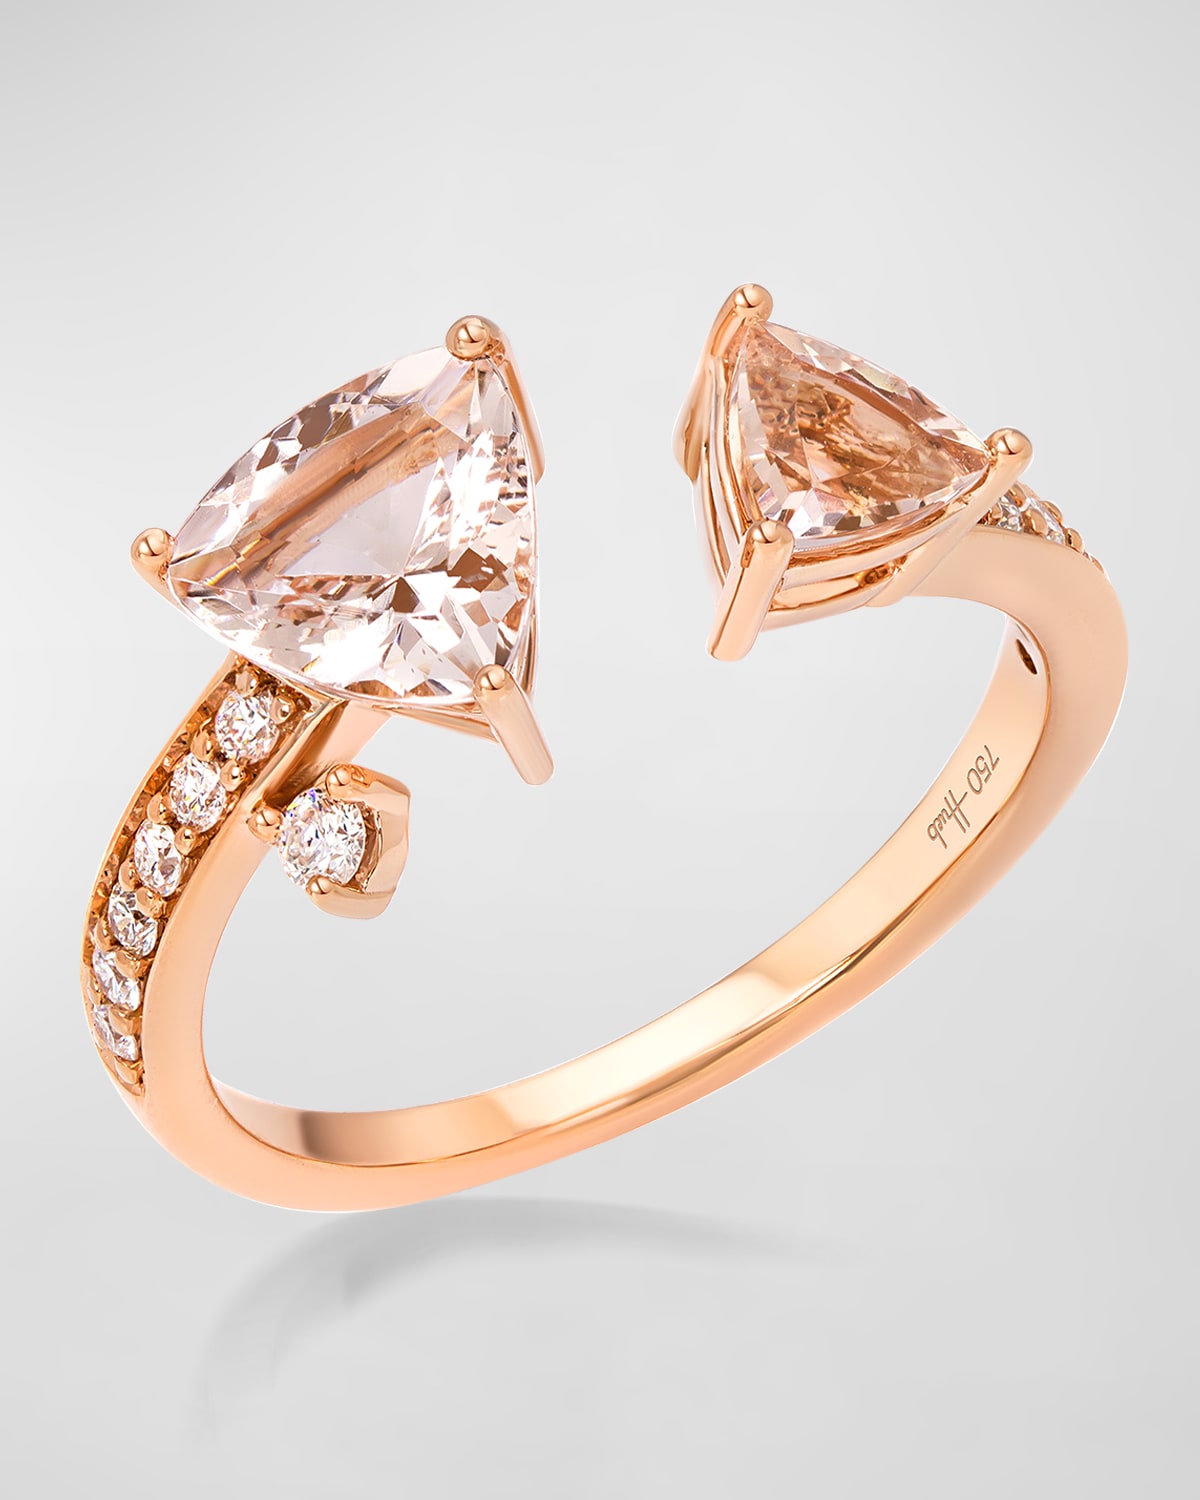 18K Mirage Pink Gold Ring with VS/GH Diamonds and Rose Morganite